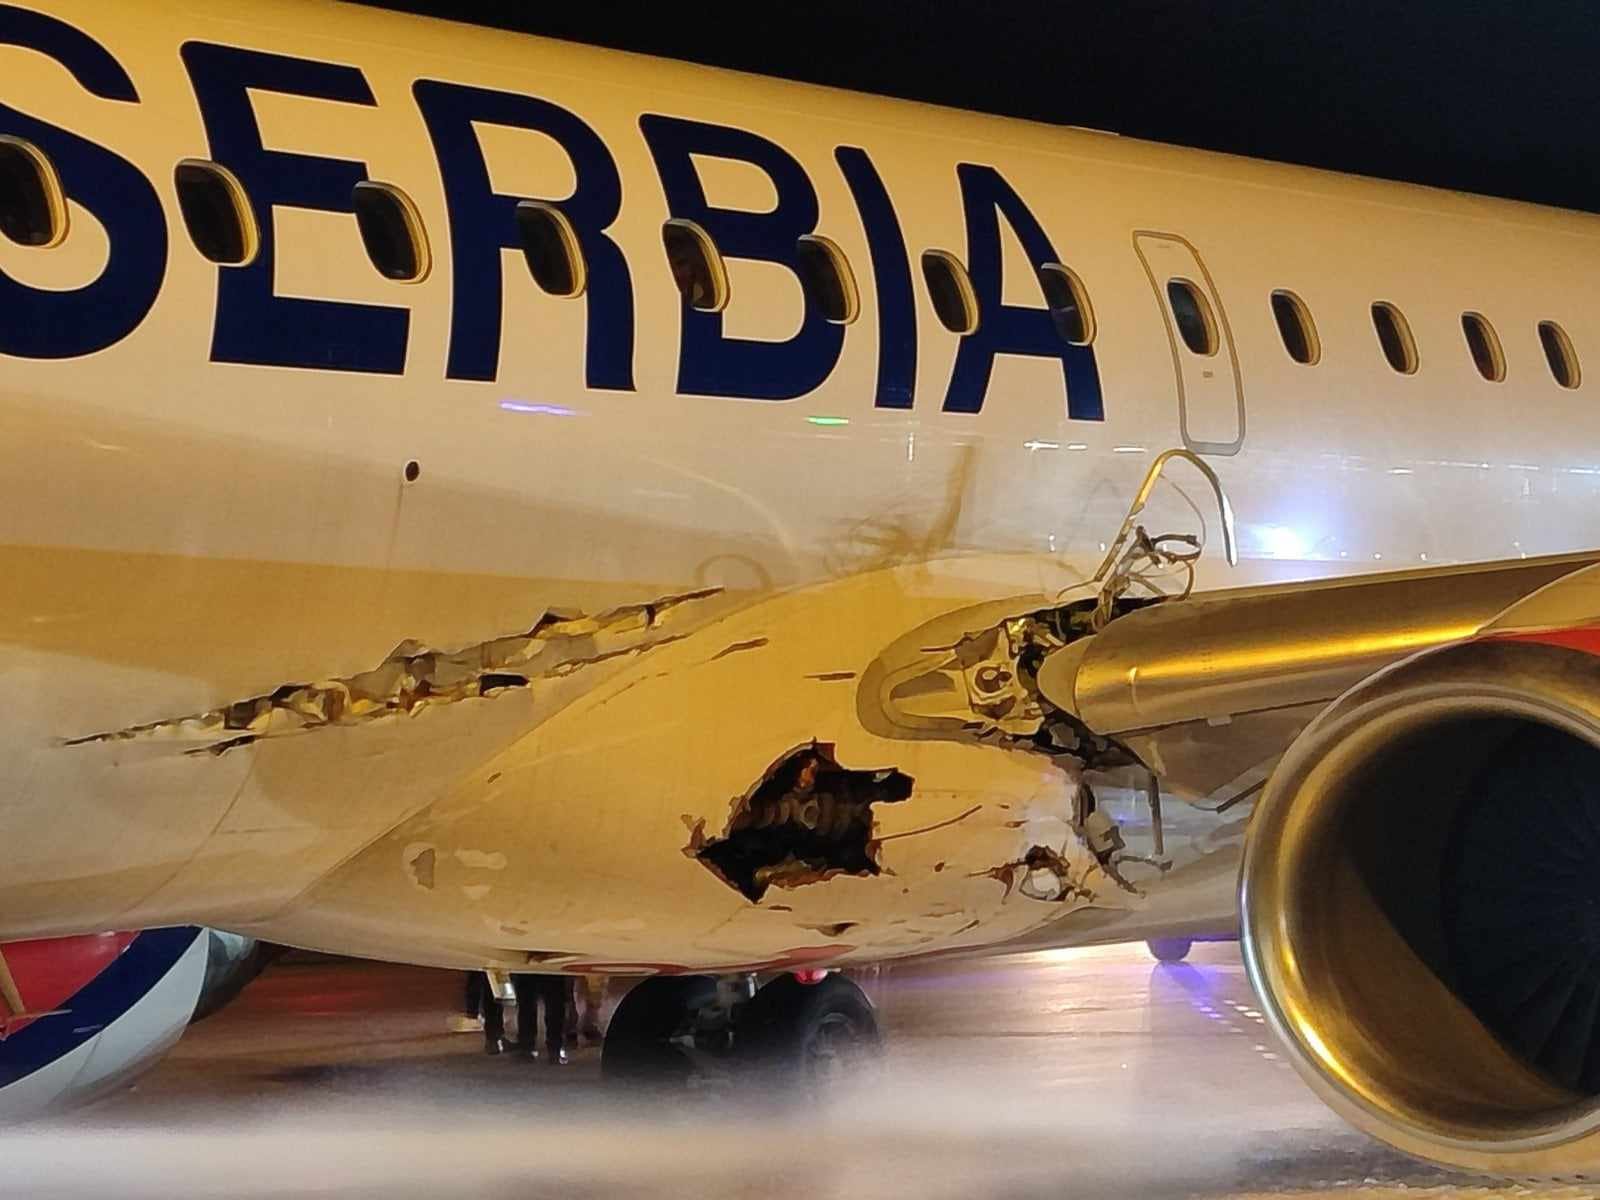 An Air Serbia flight to Dusseldorf suffered severe damage due to runway overrun